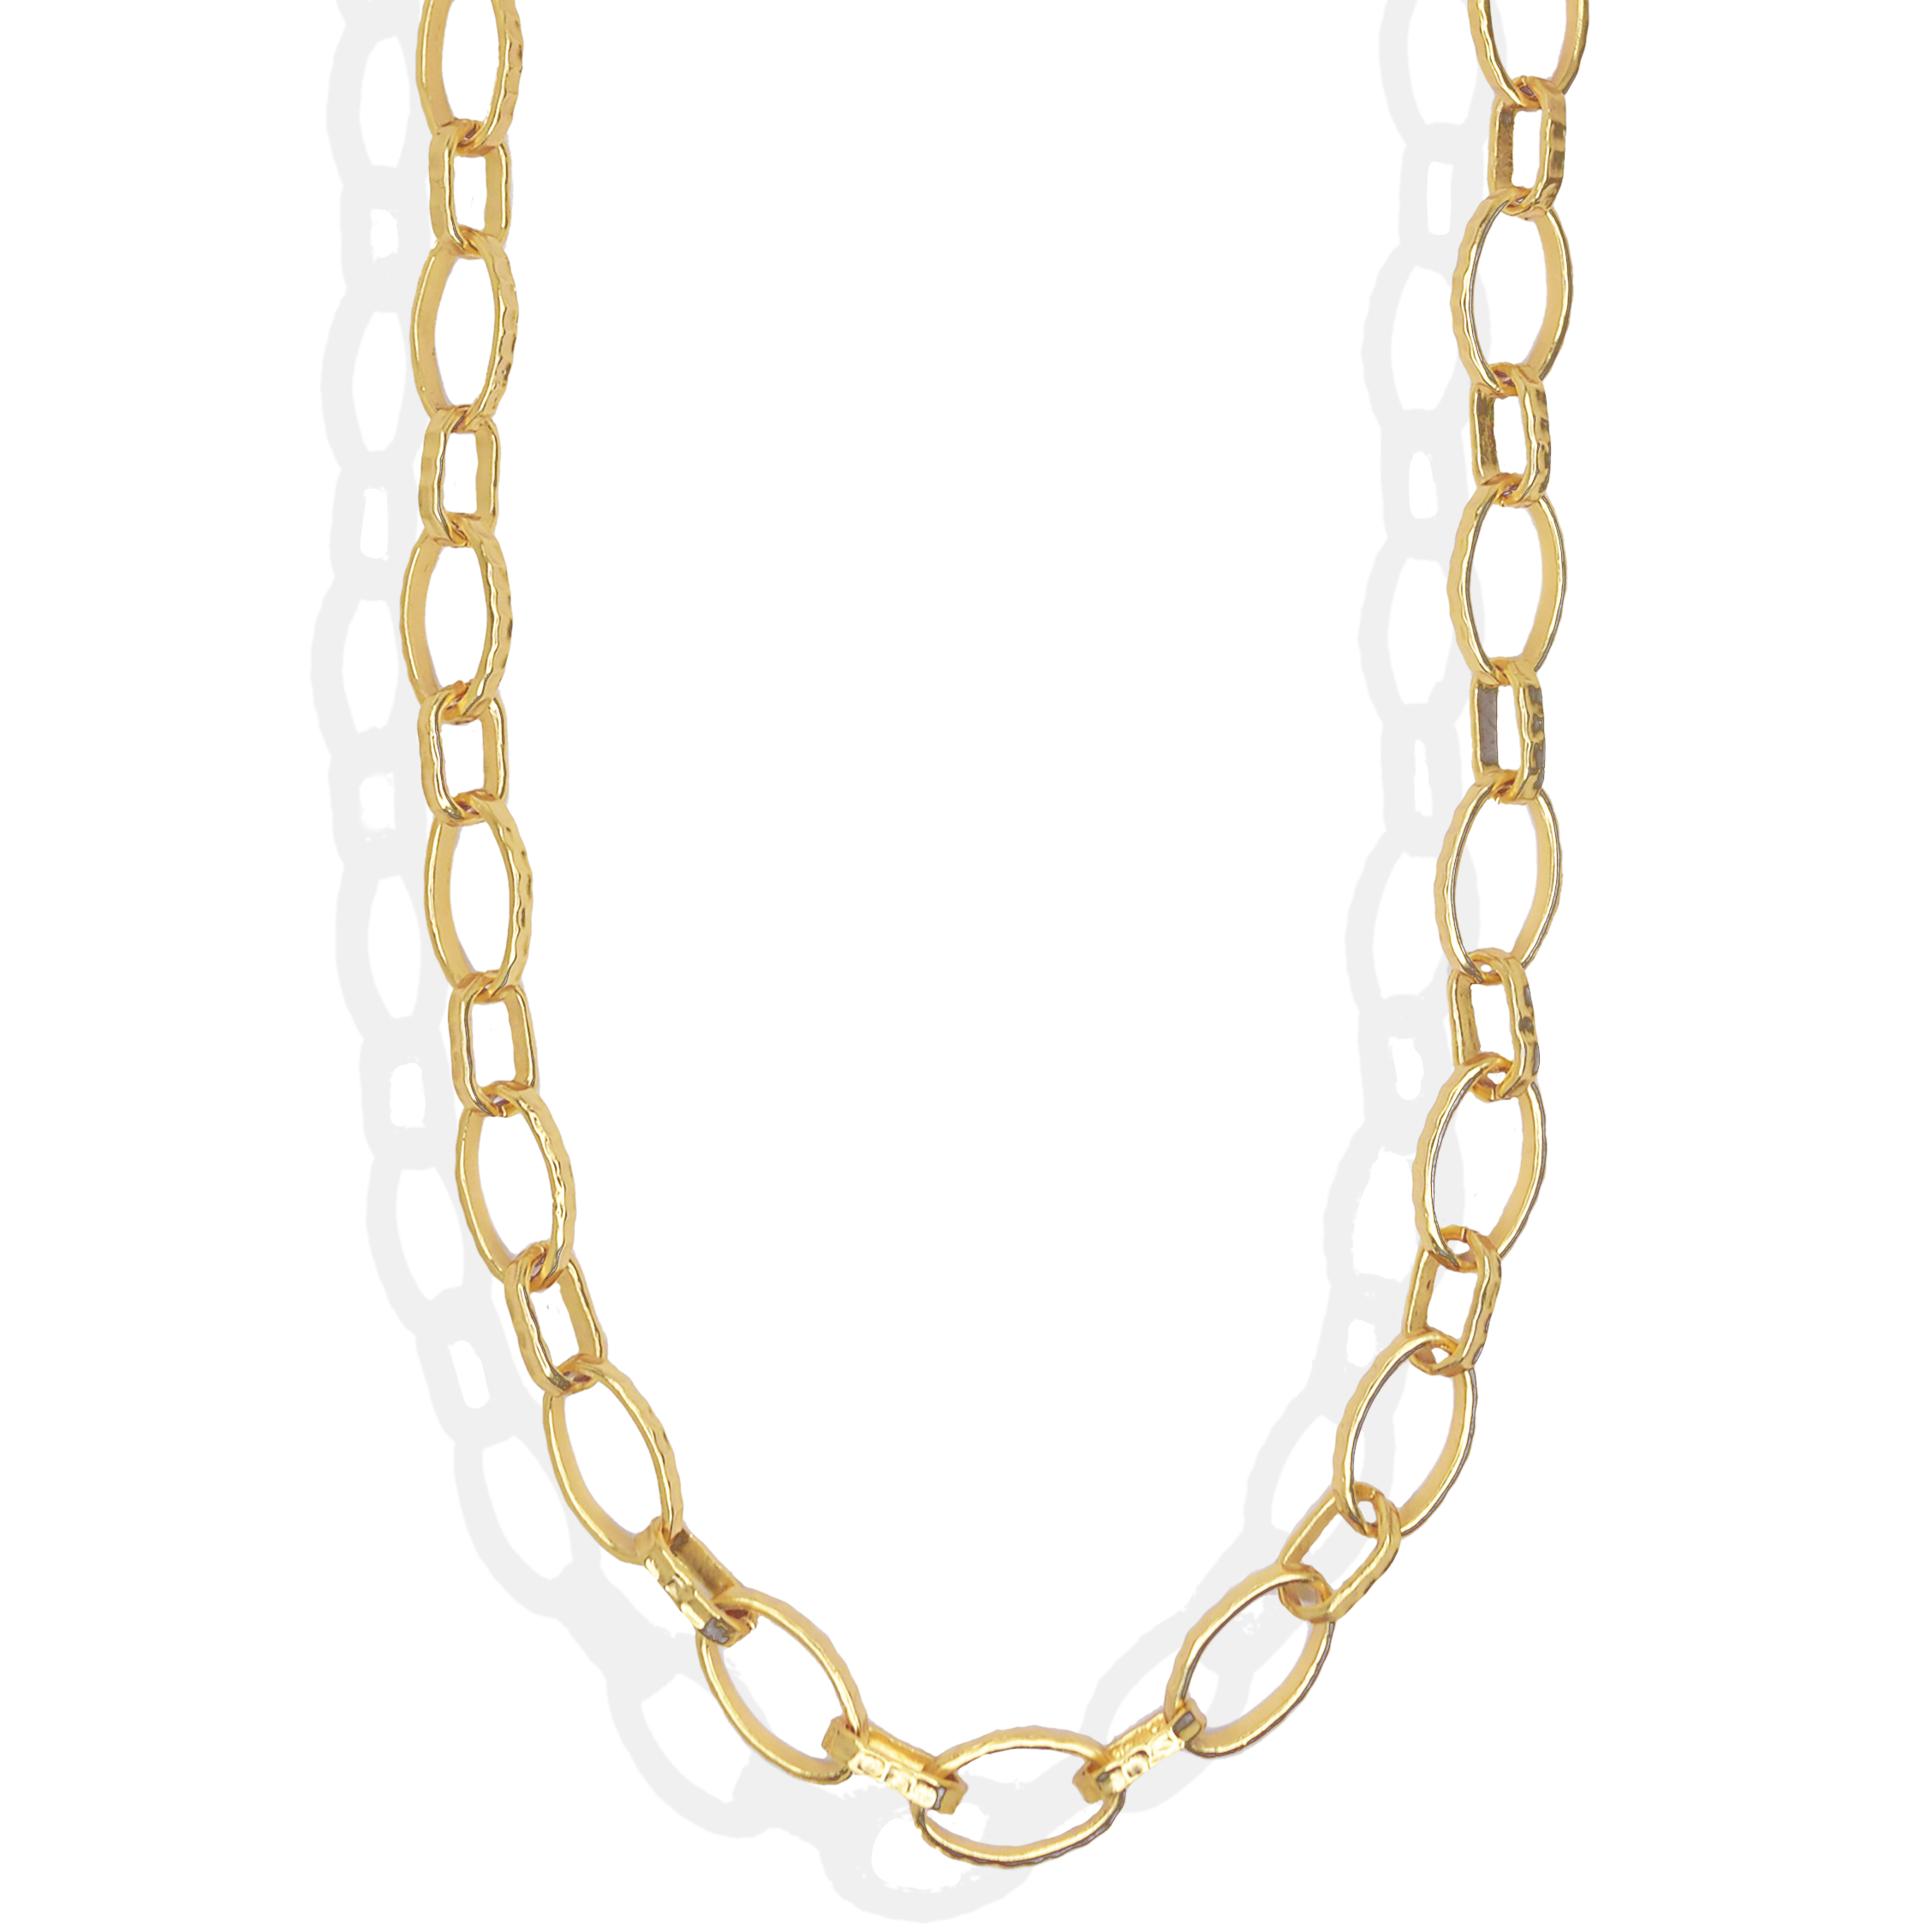 Hammered links long necklace